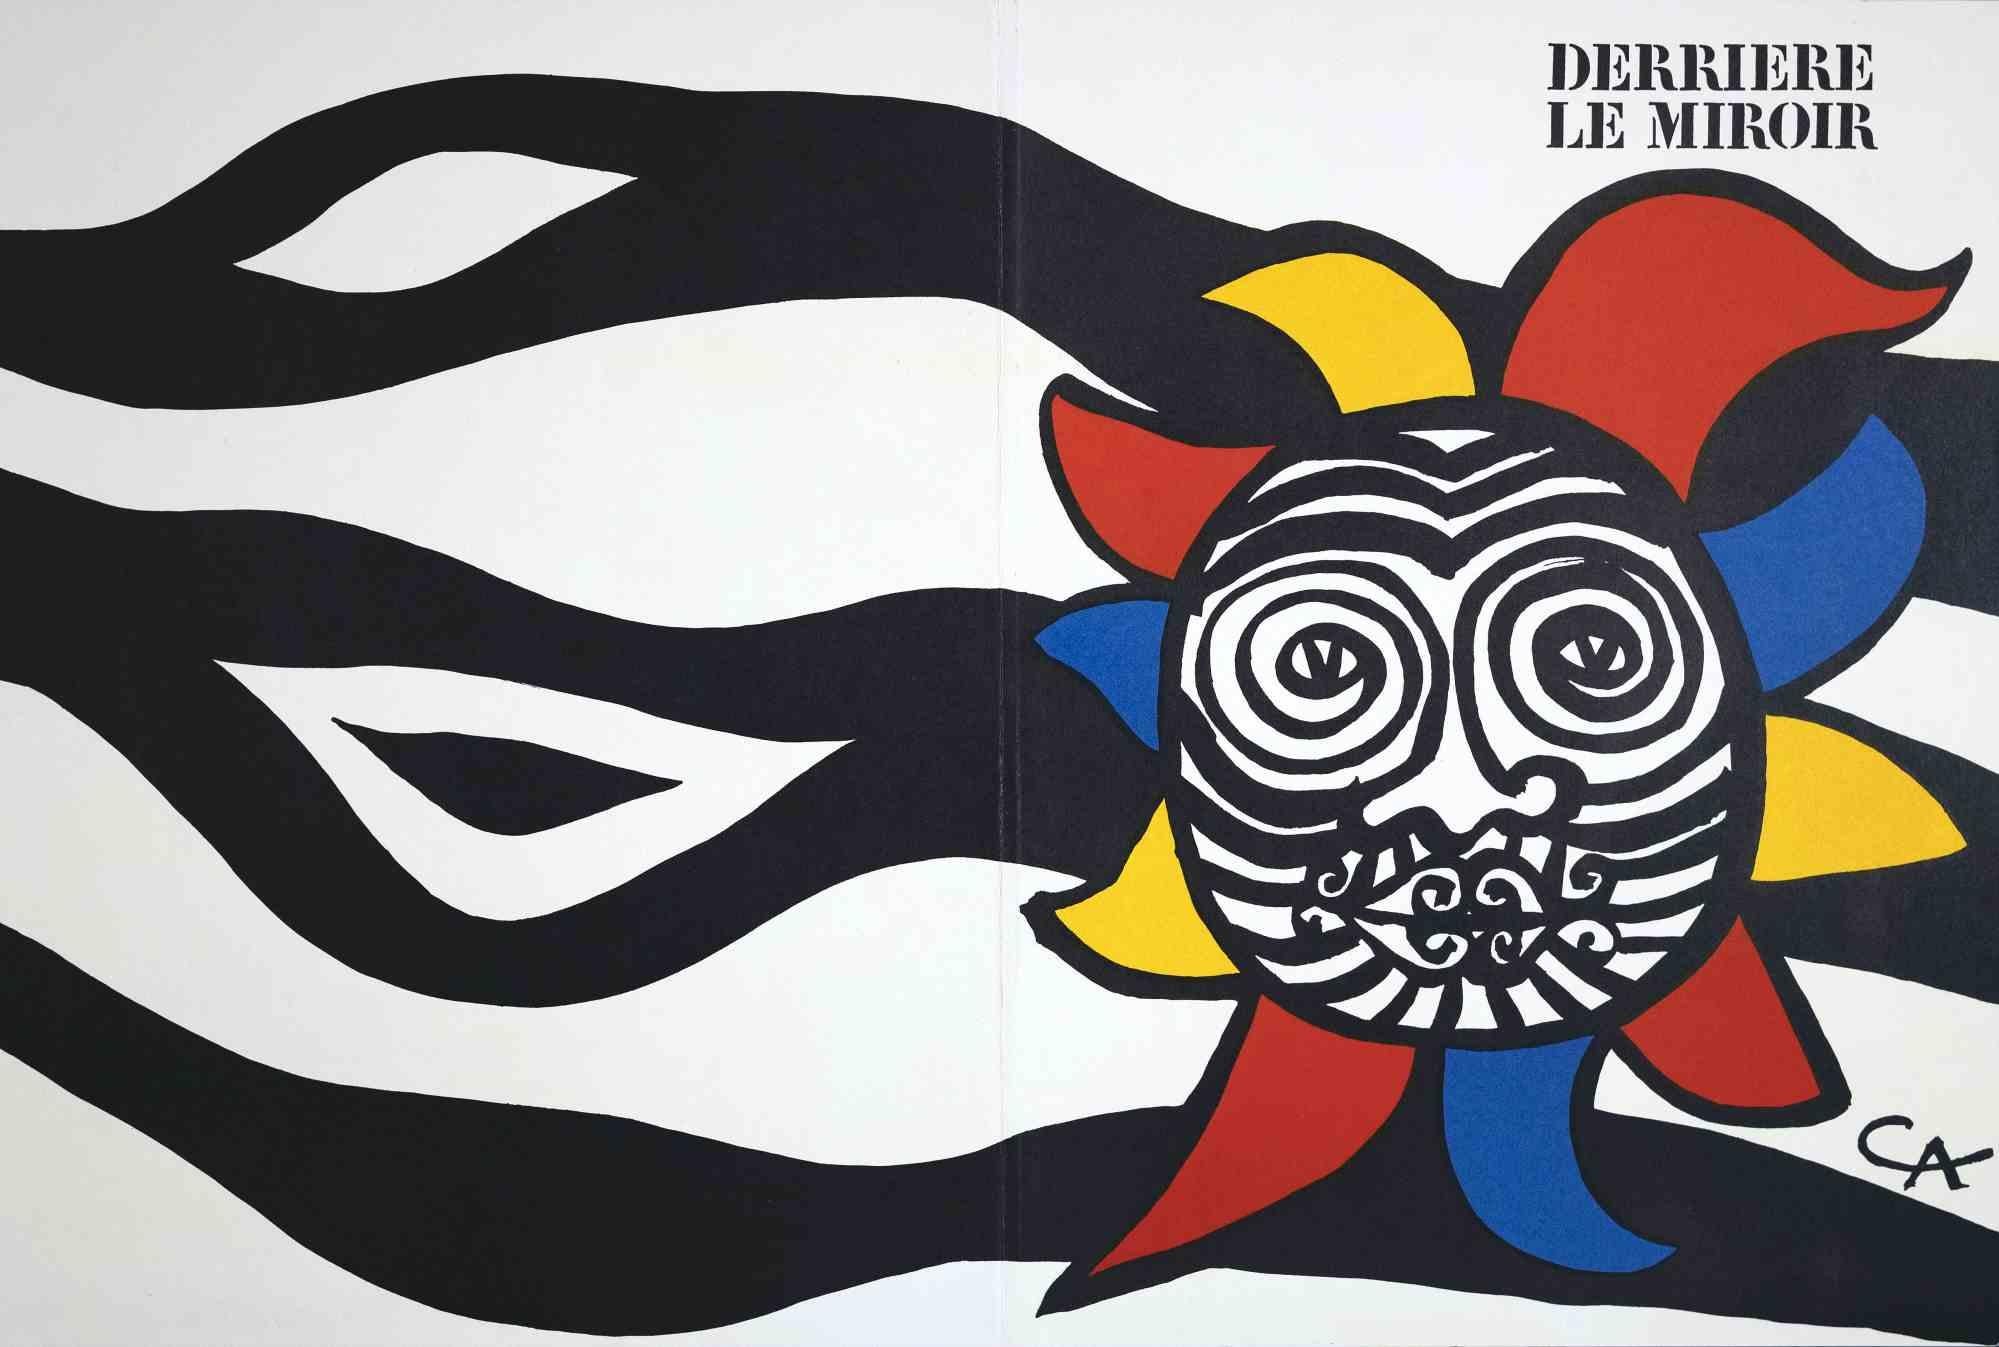 Cover for Derriere Le Miroir is an original lithograph realized by Alexander Calder in 1966.

The artwork was the cover design for the art review "Derriere Le Miroir" no. 156 and it is signed on plate. Printed by Ateliers de Maeght, Paris,